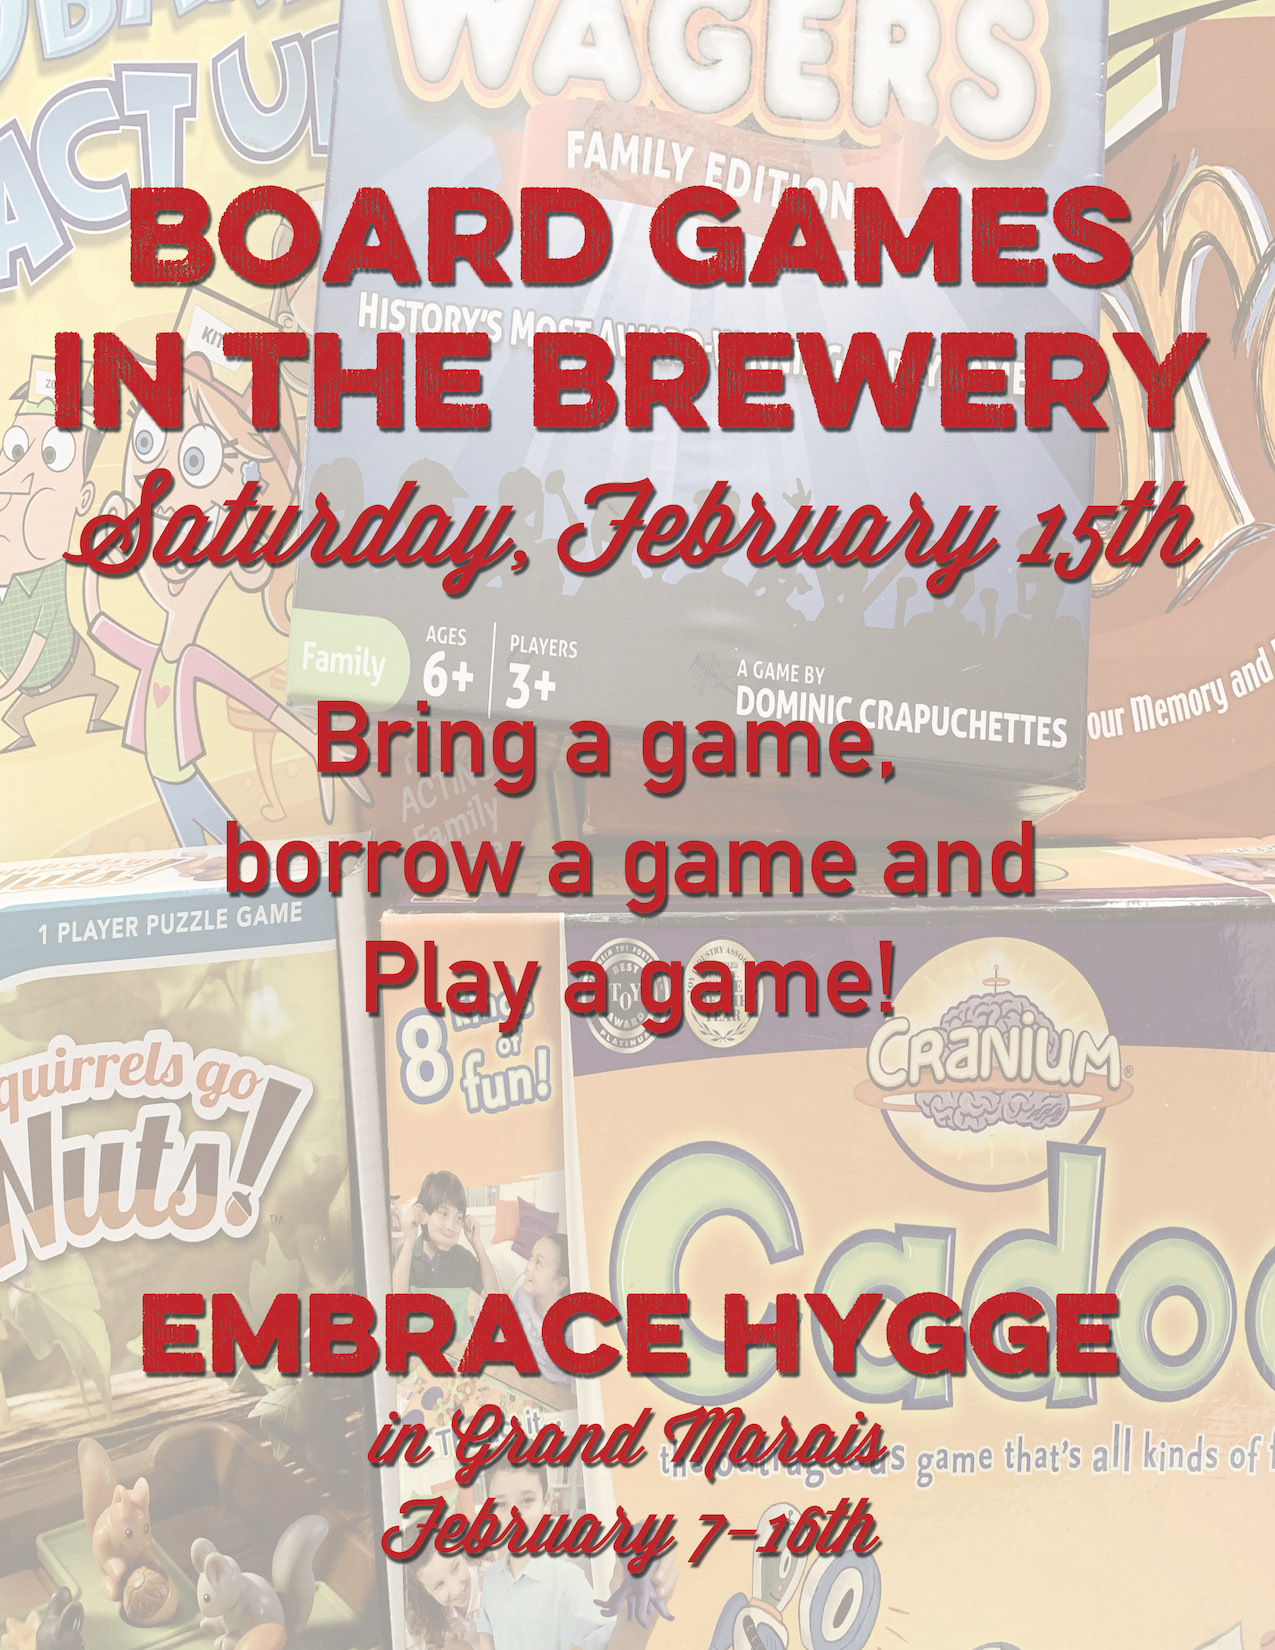 Board games at the brewery